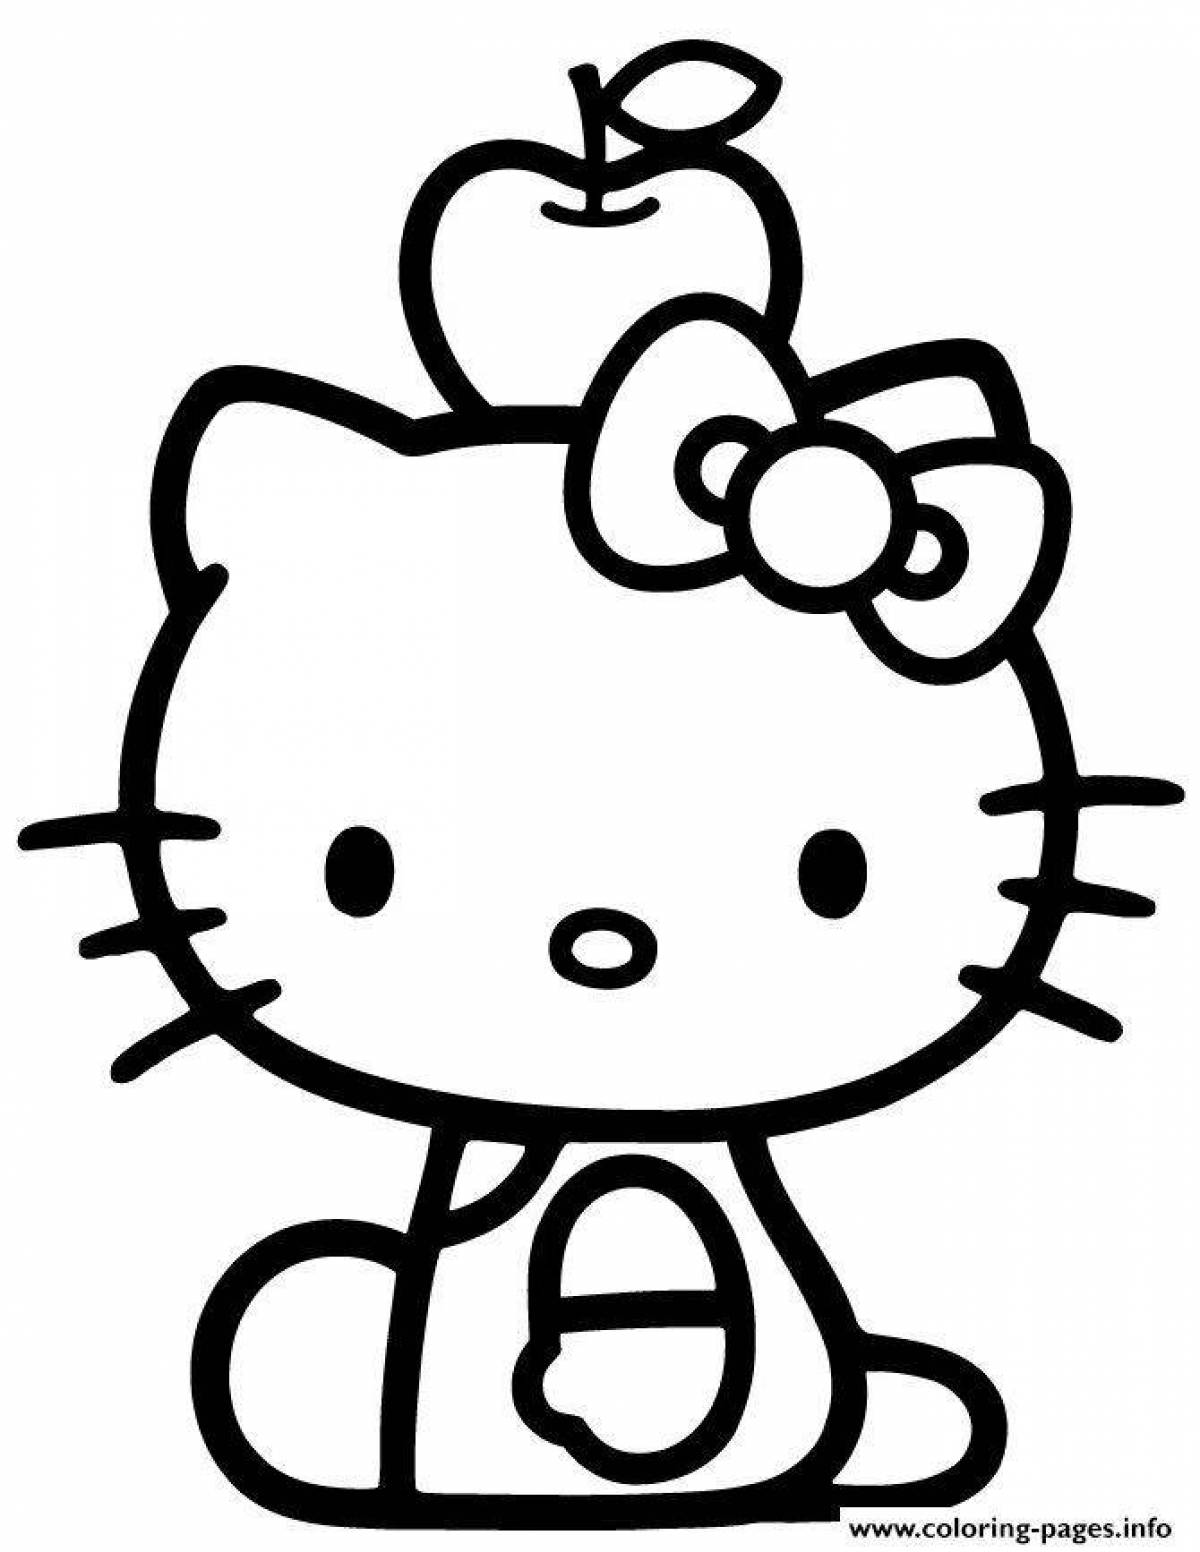 Fun coloring hello kitty in black and white